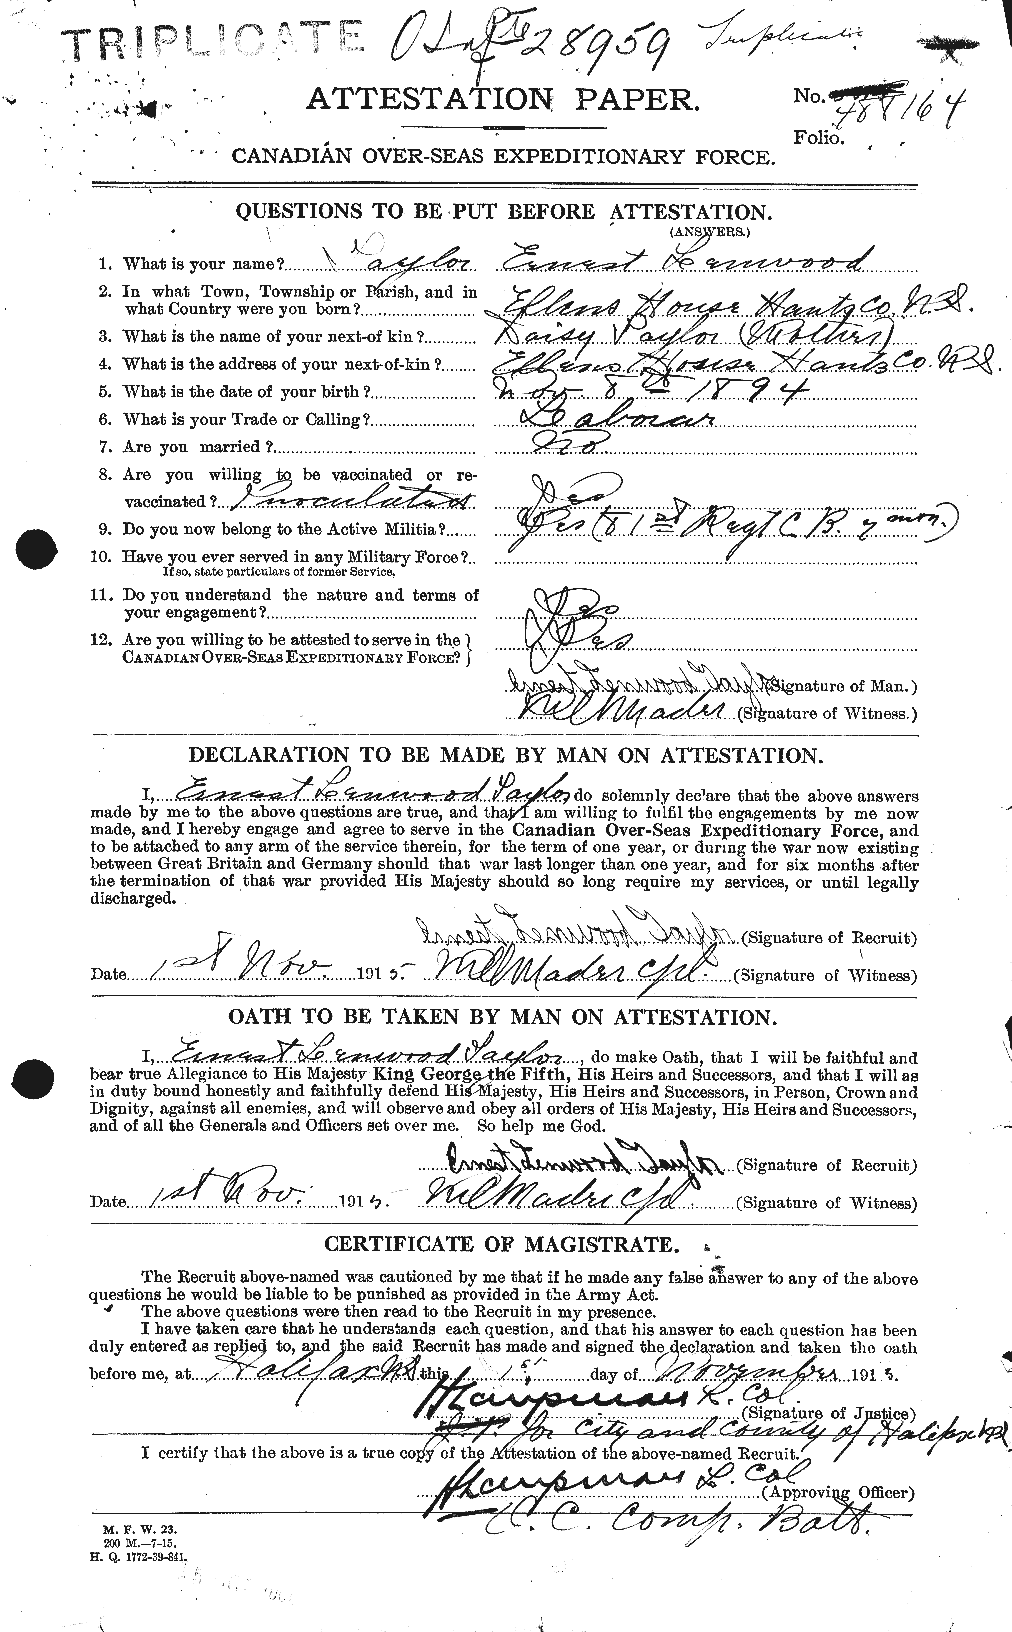 Personnel Records of the First World War - CEF 627398a